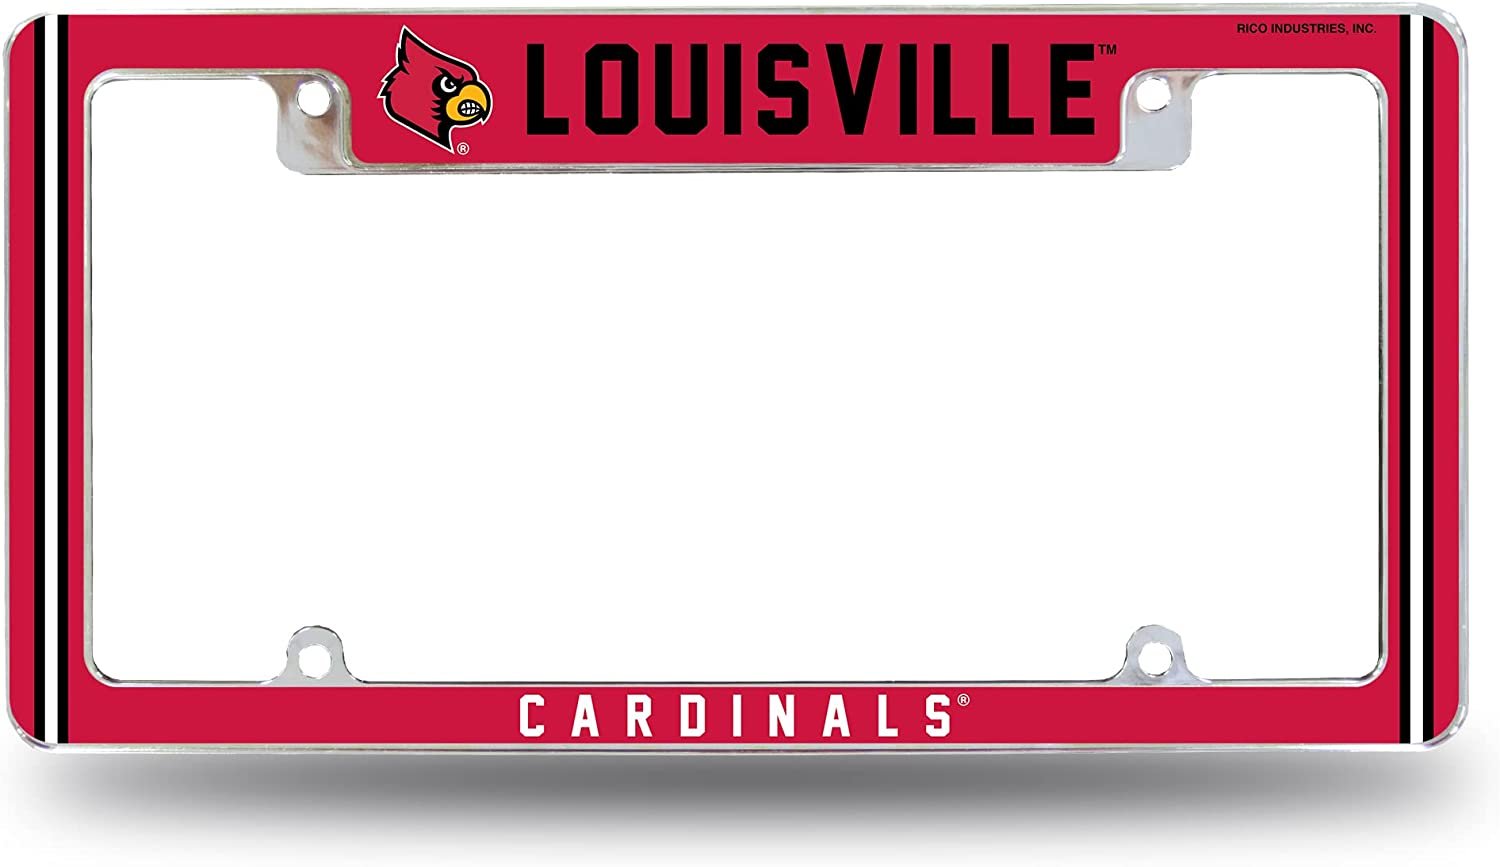 University of Louisville Cardinals Metal License Plate Frame Chrome Tag Cover 12x6 Inch Alternate Design